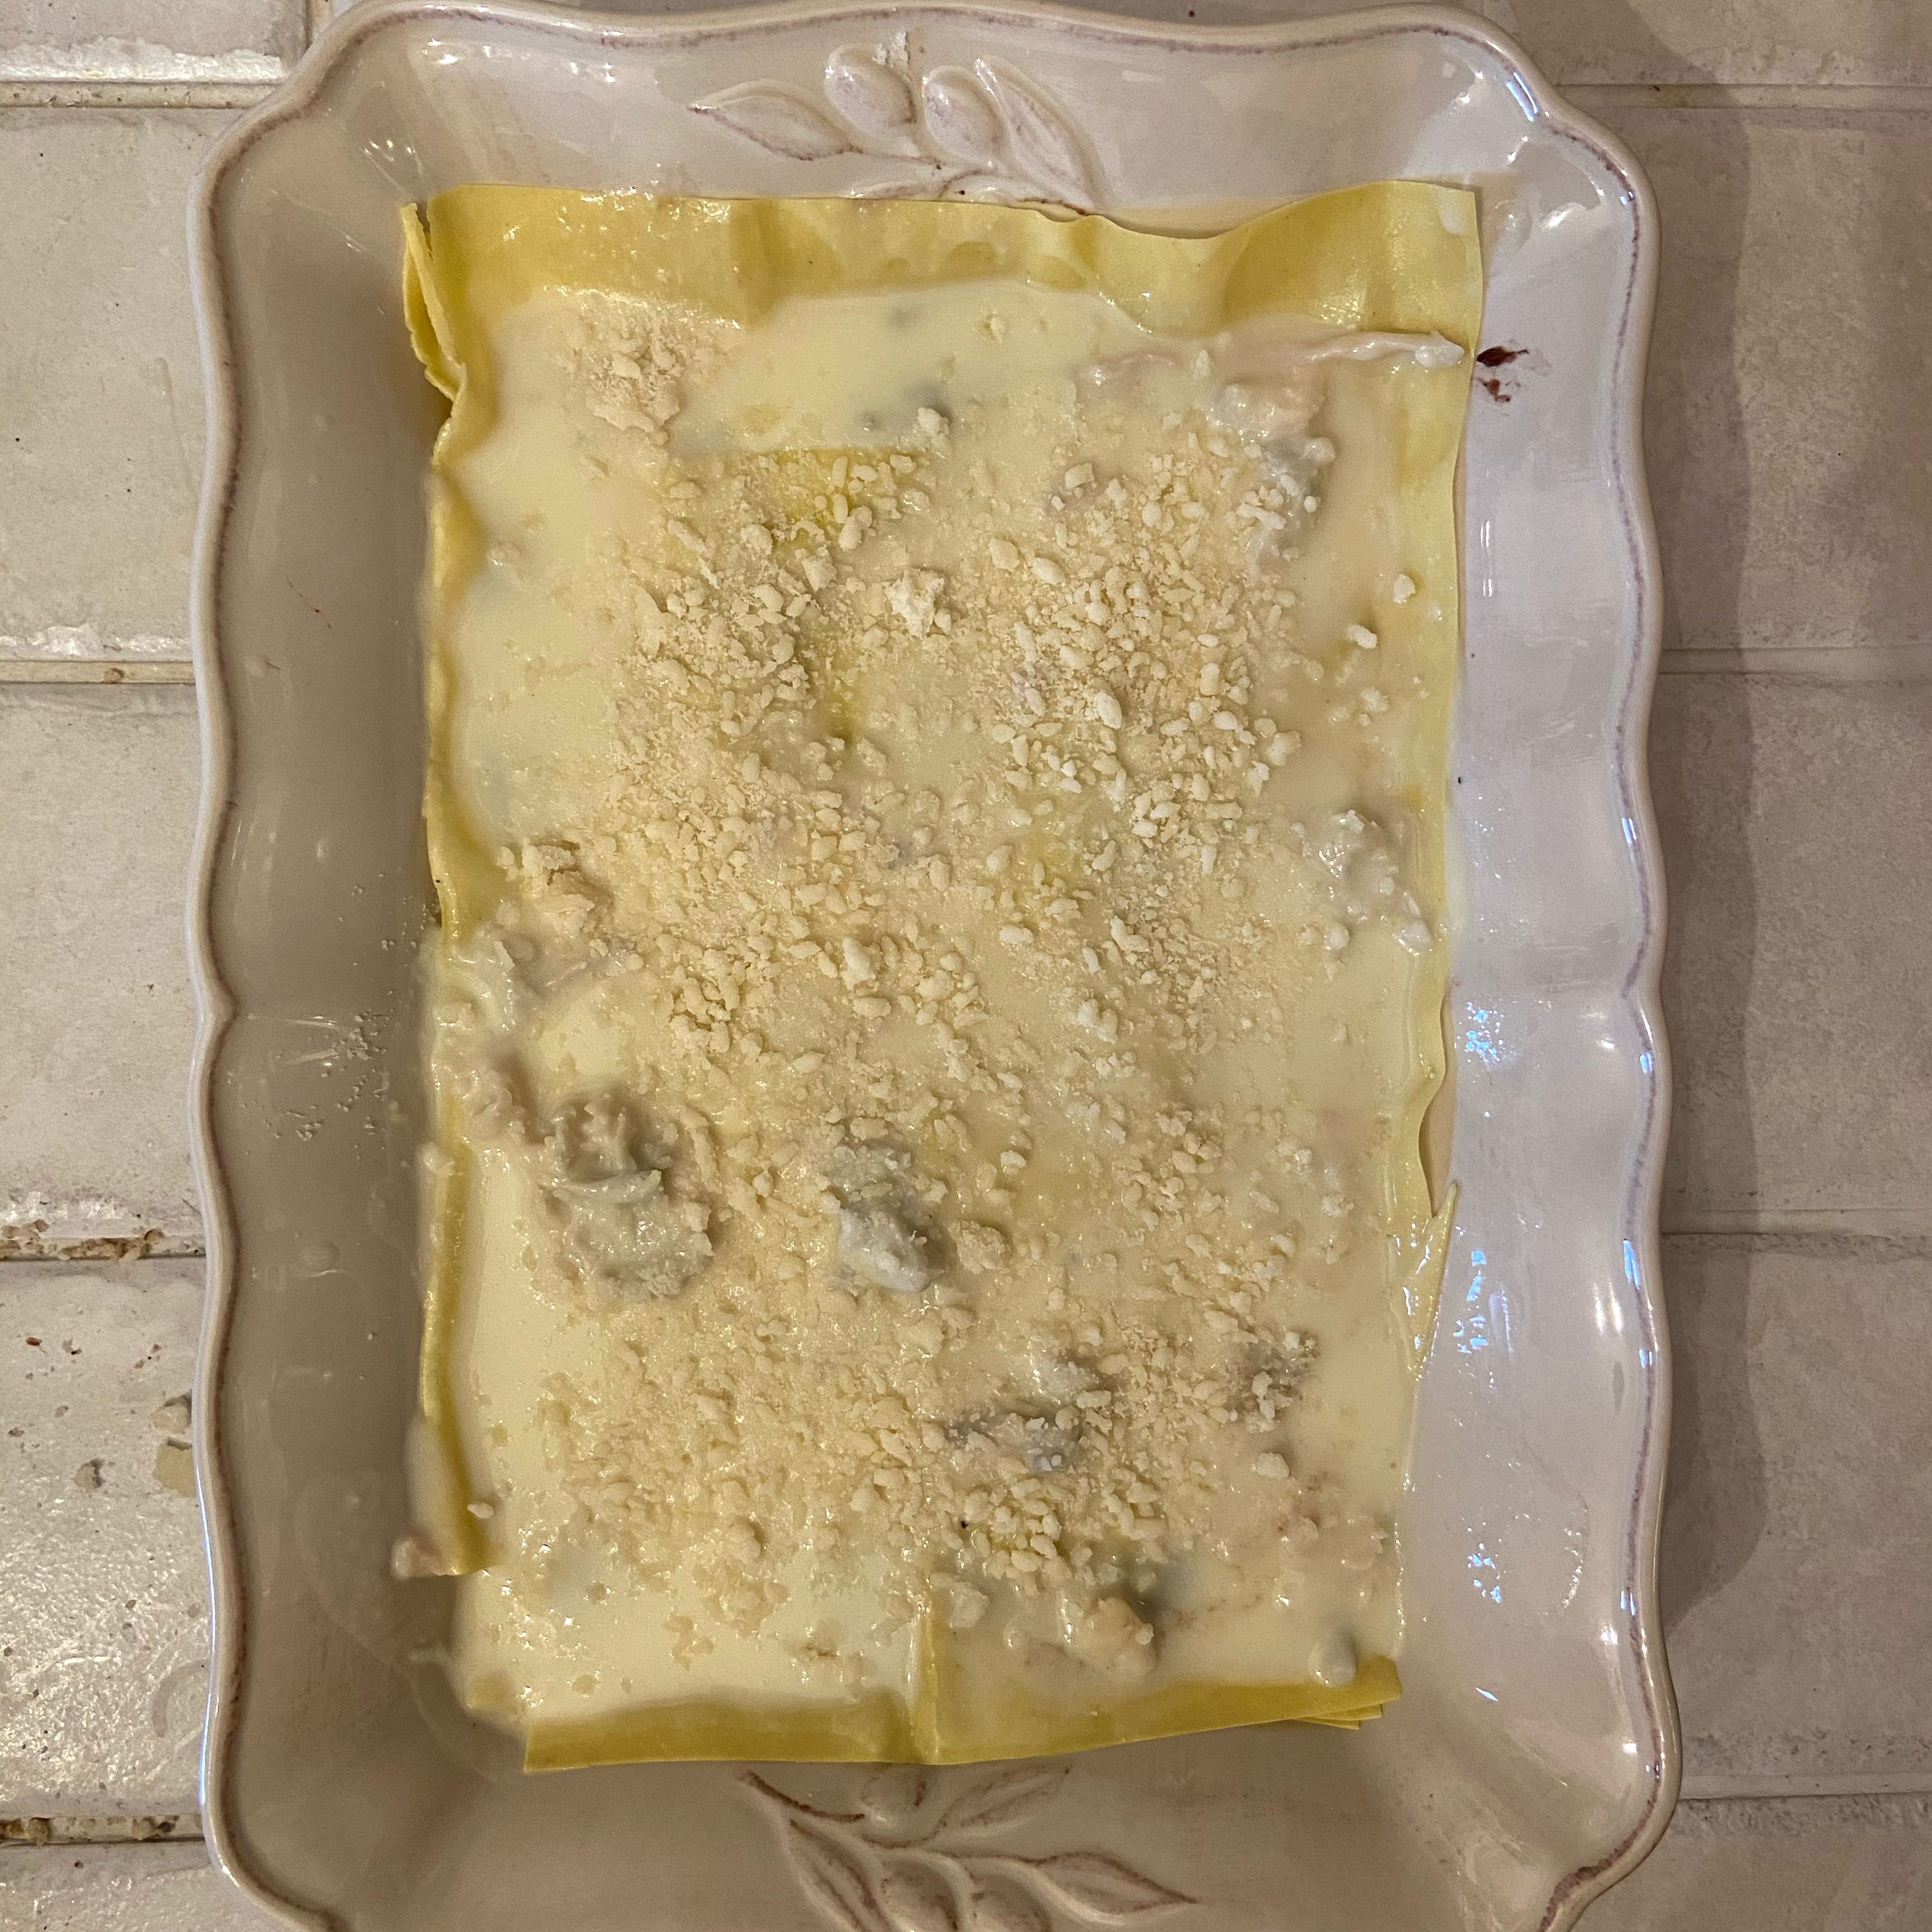 Only add the Gorgonzola sauce and Parmesan cheese as your final layer. Then bake in preheated oven at 200 degrees for around 25/30 minutes.